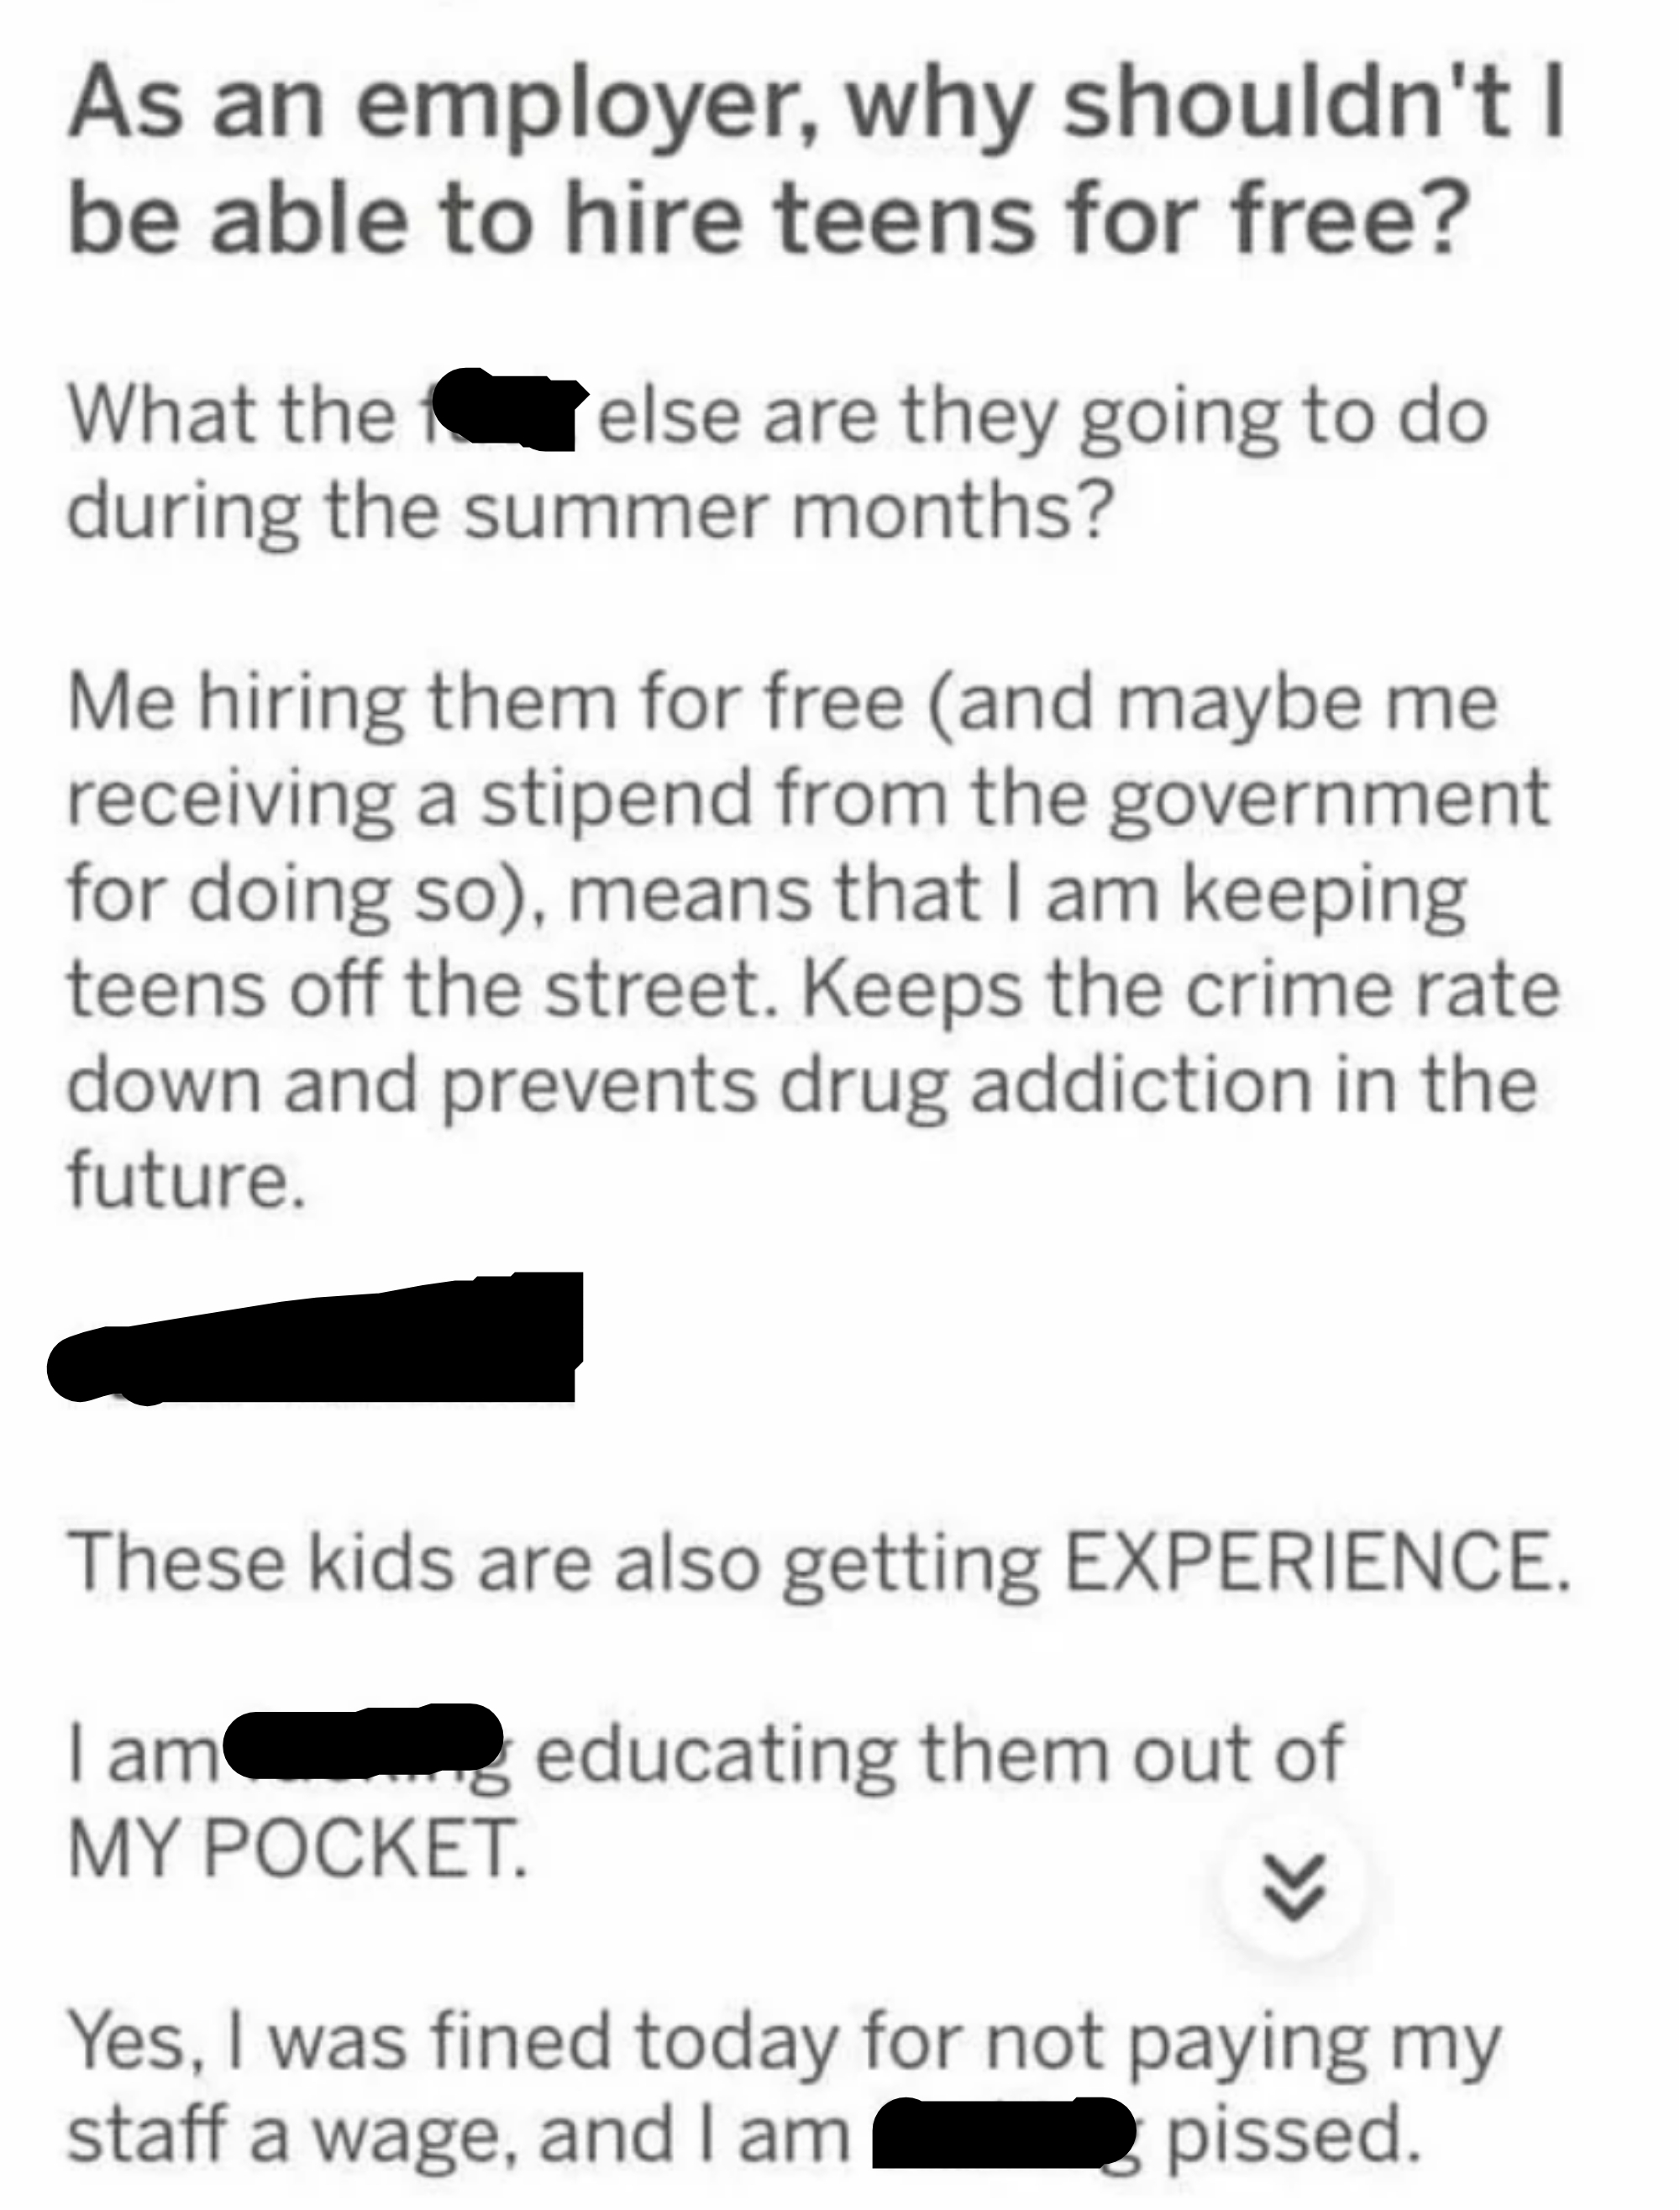 &quot;These kids are also getting EXPERIENCE.&quot;